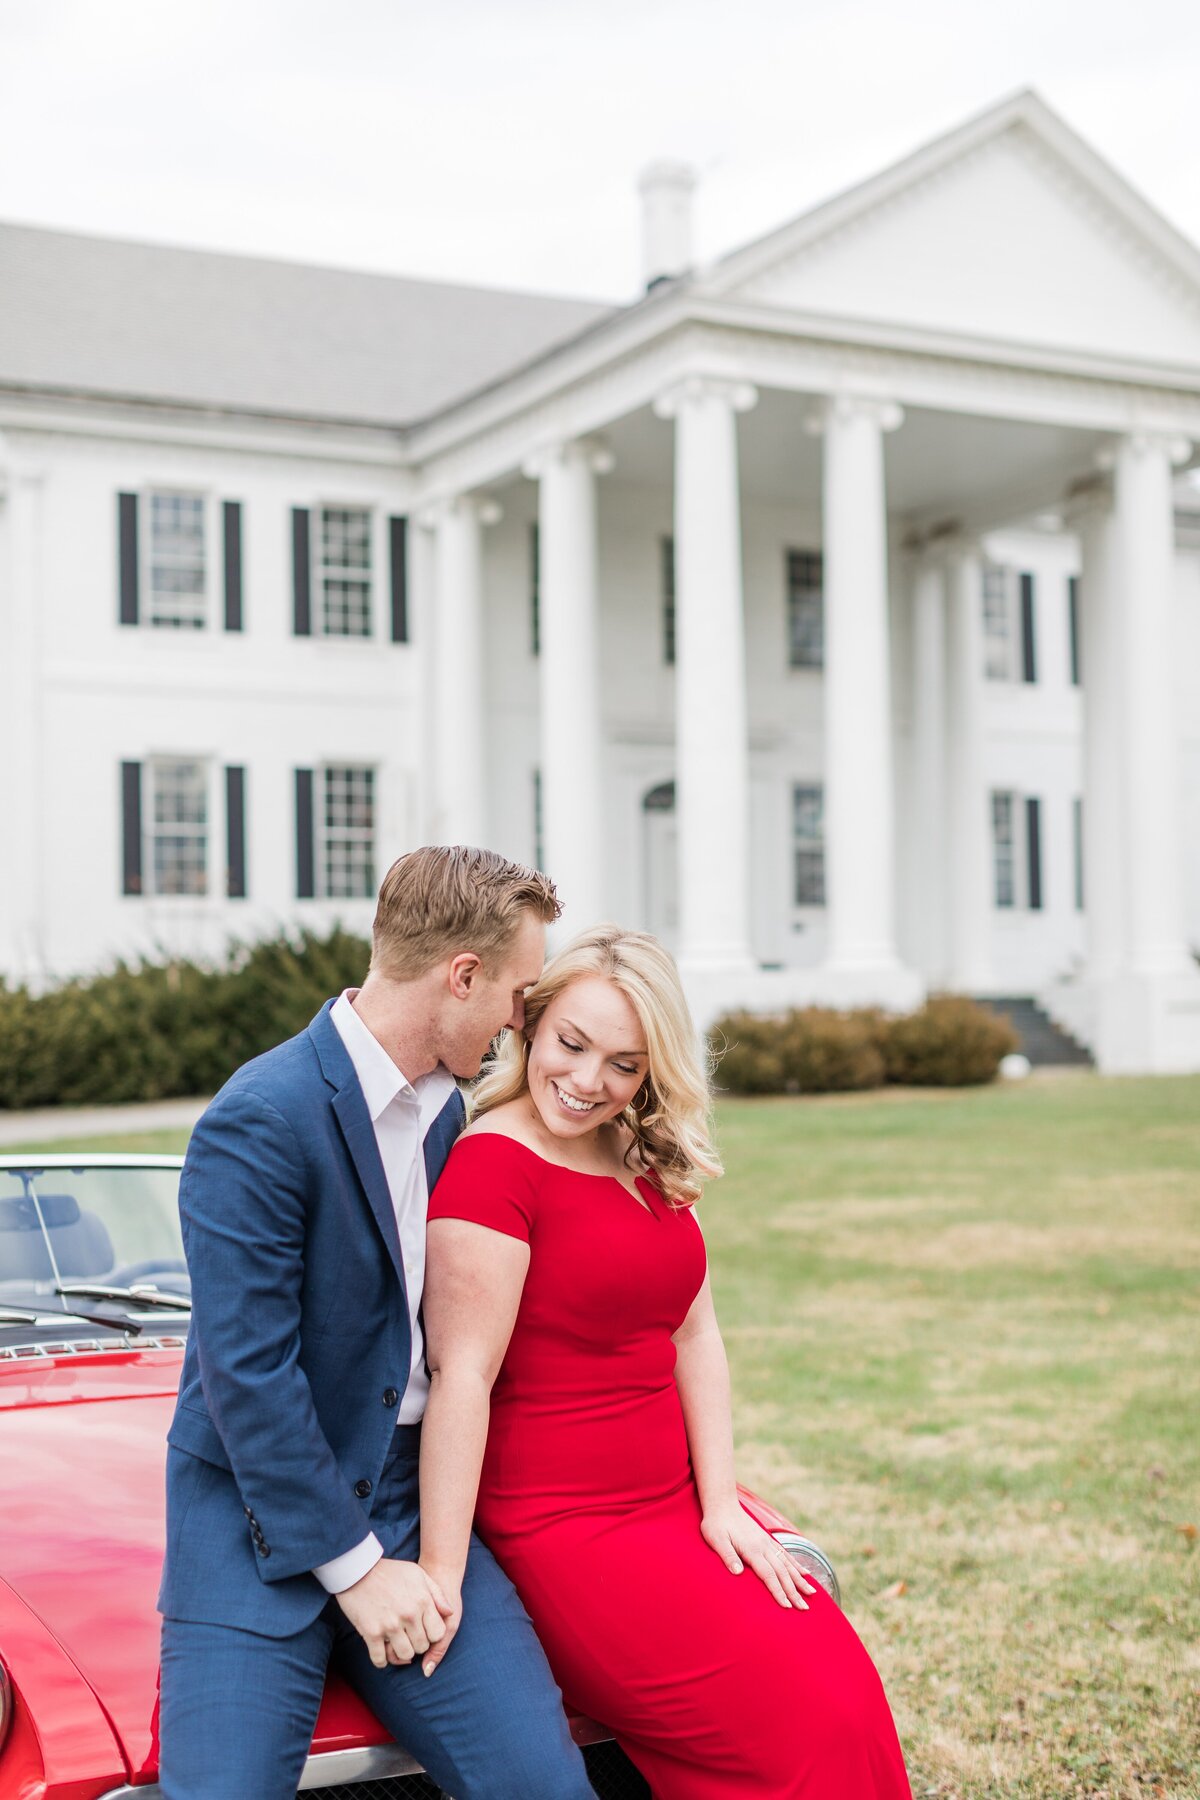 Vintage-Car-Engagement-Photos-DC-Maryland-Silver-Orchard-Creative_0025